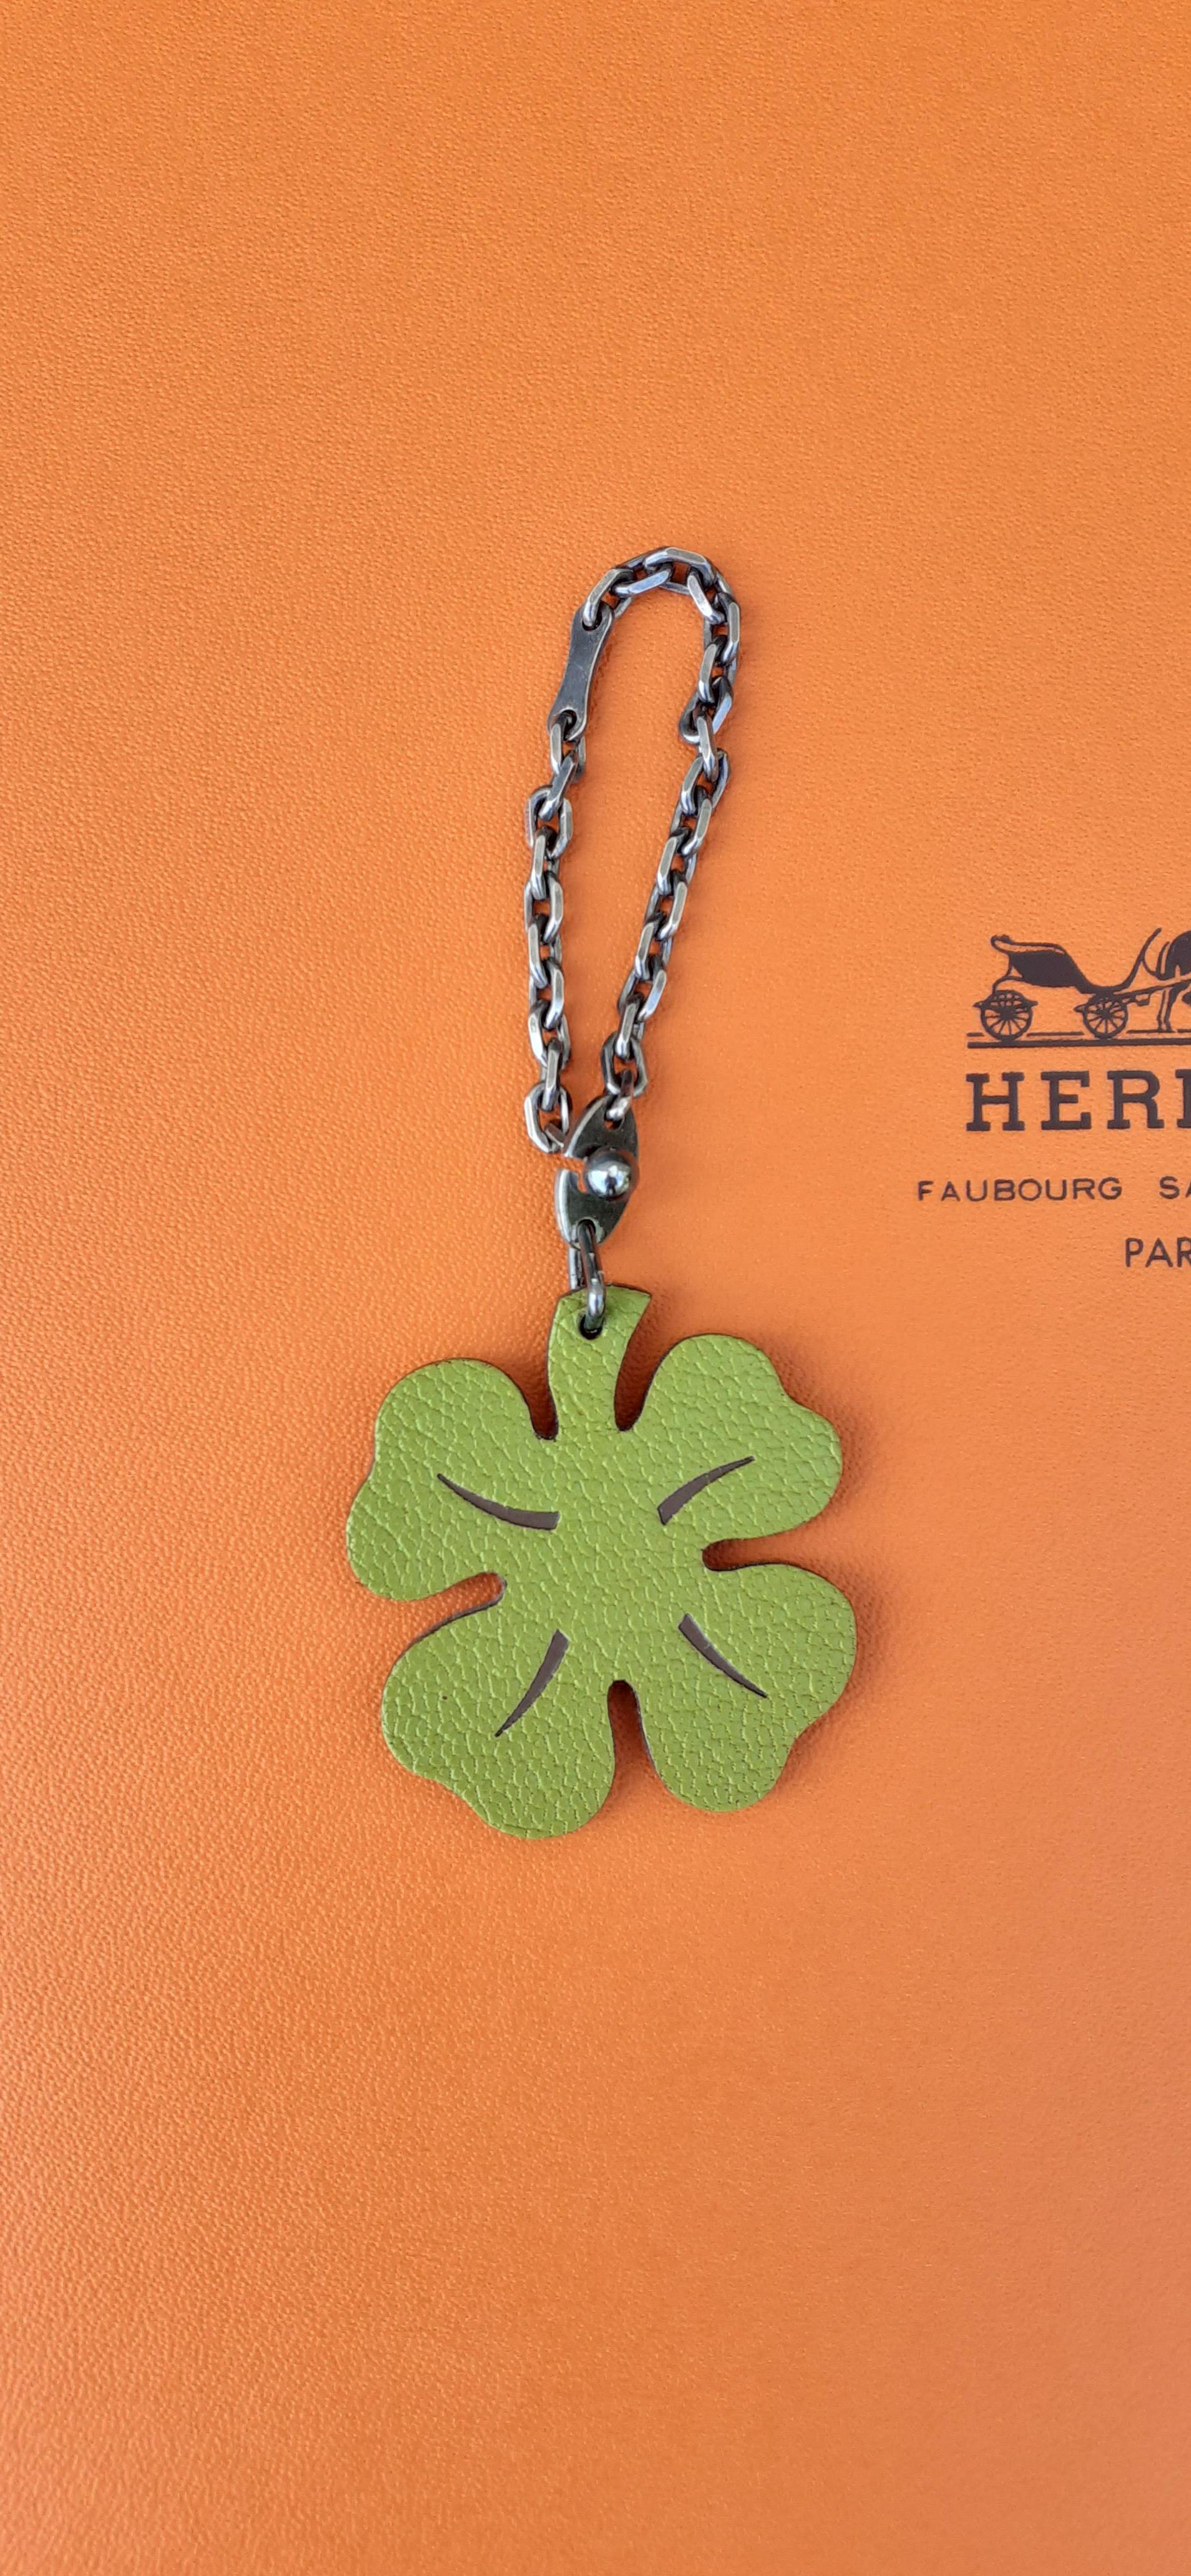 Super Cute Authentic Hermès Key Holder

Can be used as Bag Charm for your Kelly, Birkin or other Hermès Bag

Pattern: 4-leaf Clover

Made of Grained Leather

Colorway: 1 side Green and Brown, Other side Plain Orange

